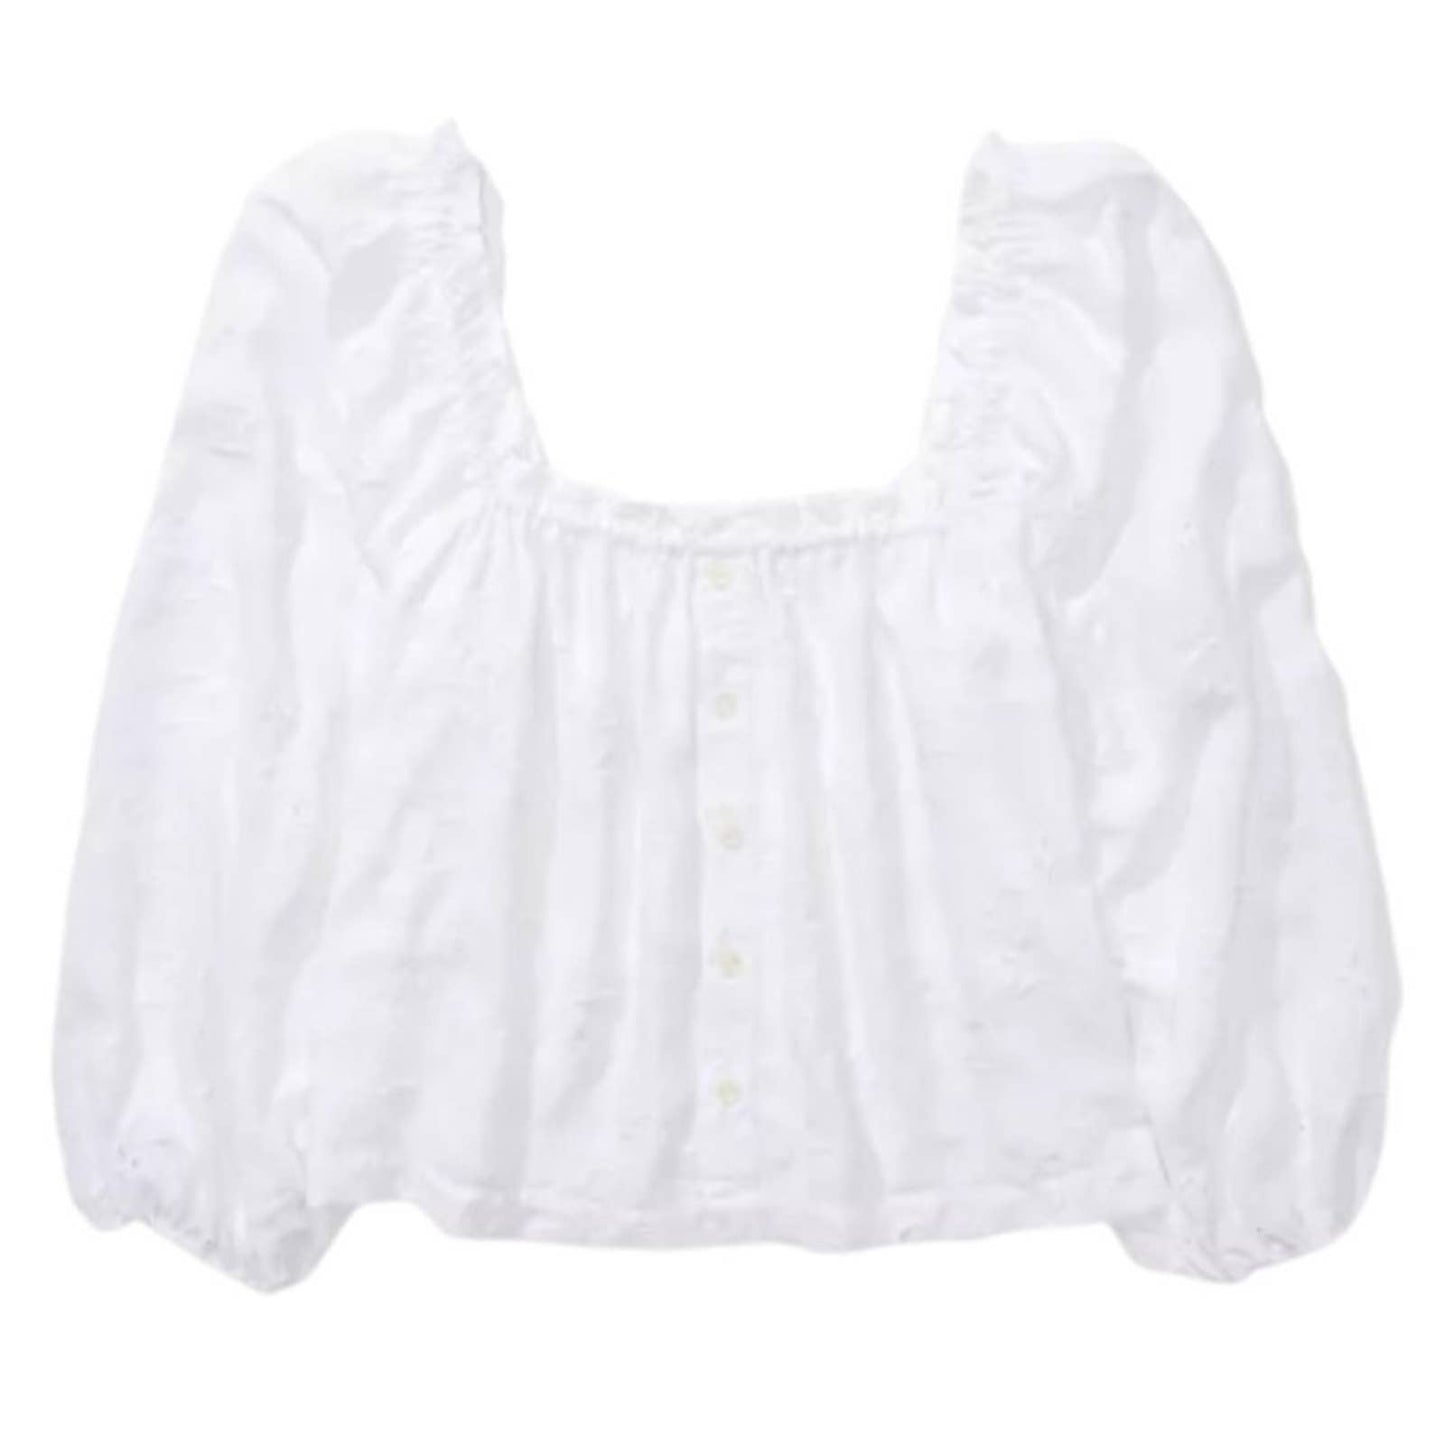 American Eagle Outfitters AE Puff Sleeve Button-up Blouse in White NWT Size Sm